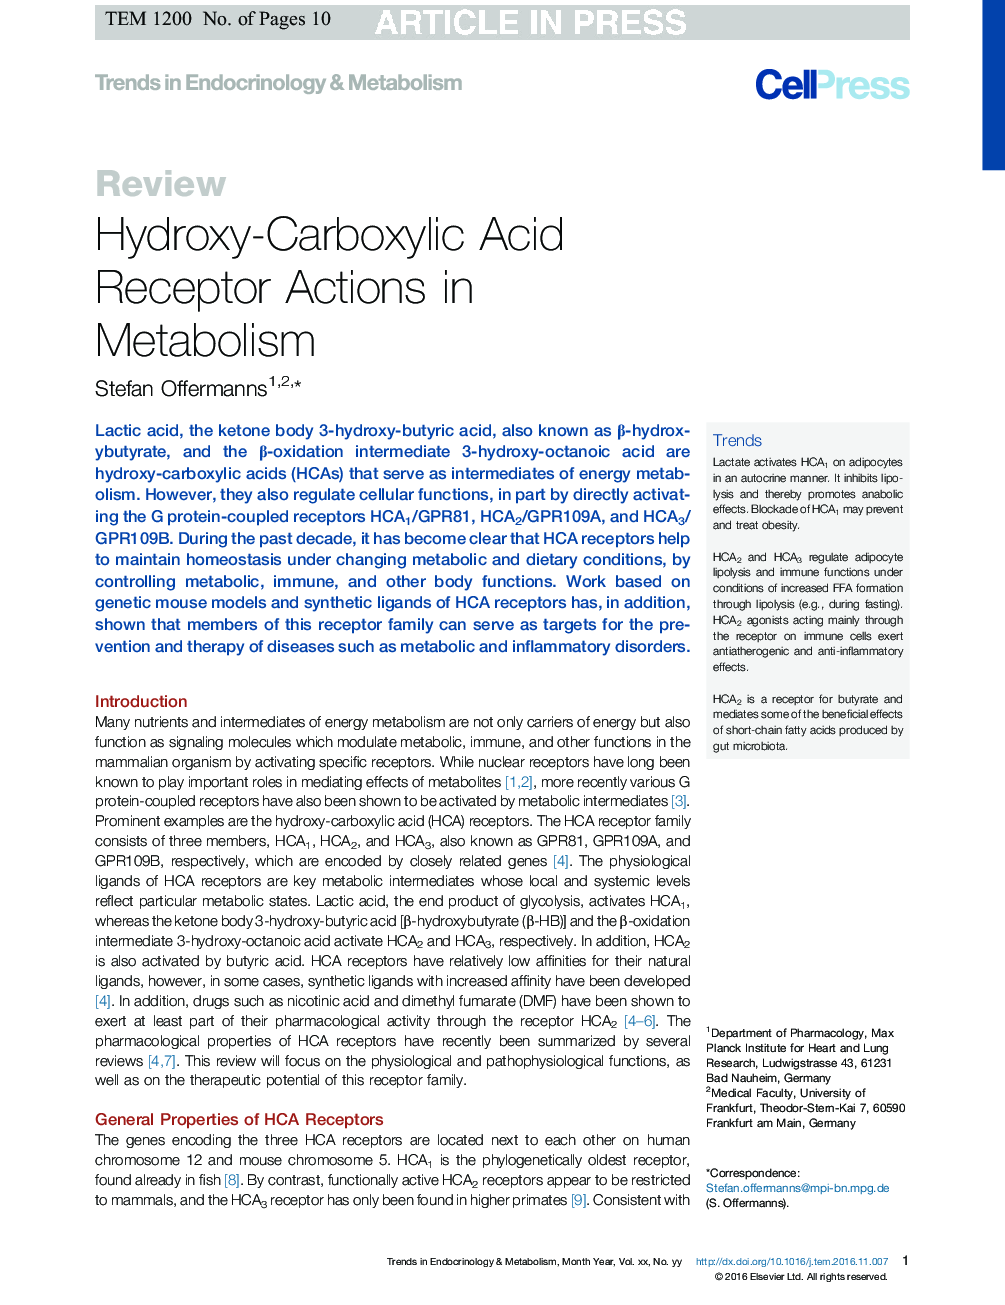 Hydroxy-Carboxylic Acid Receptor Actions in Metabolism